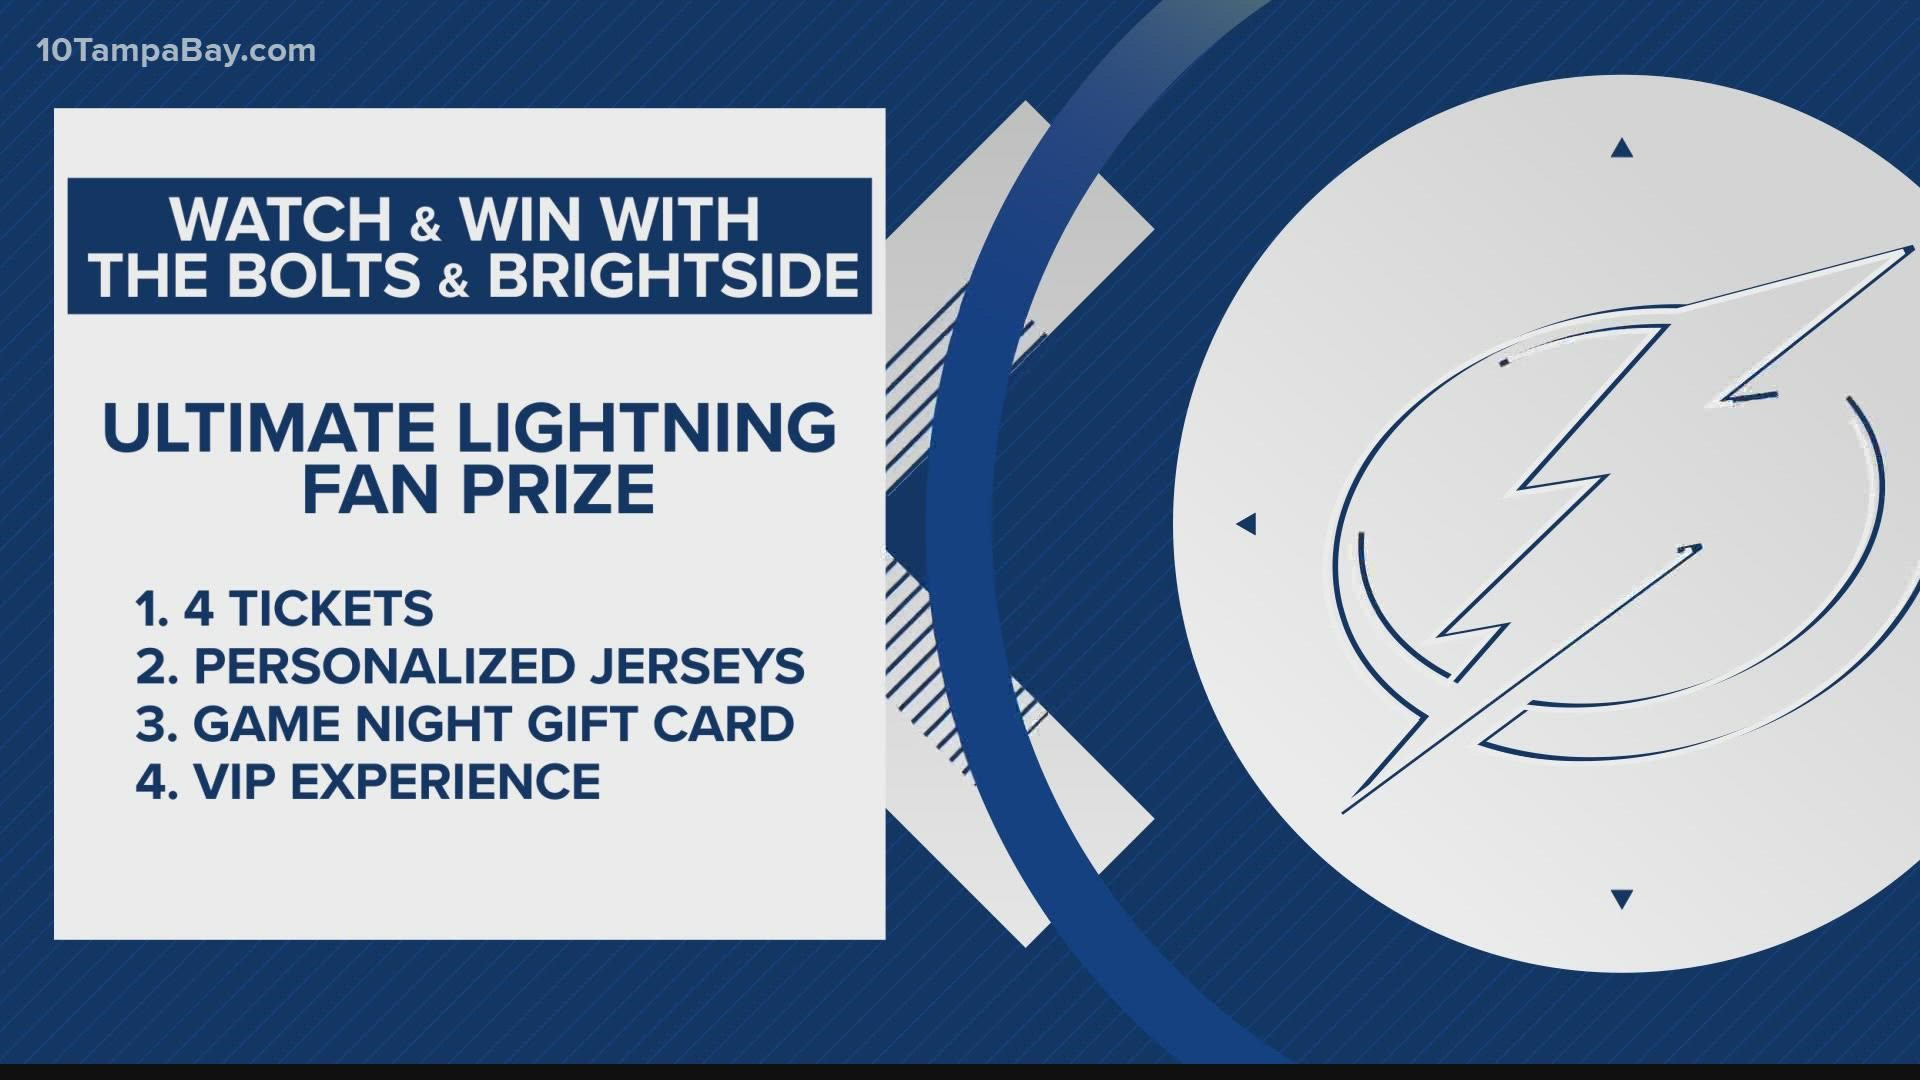 One grand prize winner will get Bolts tickets and more.